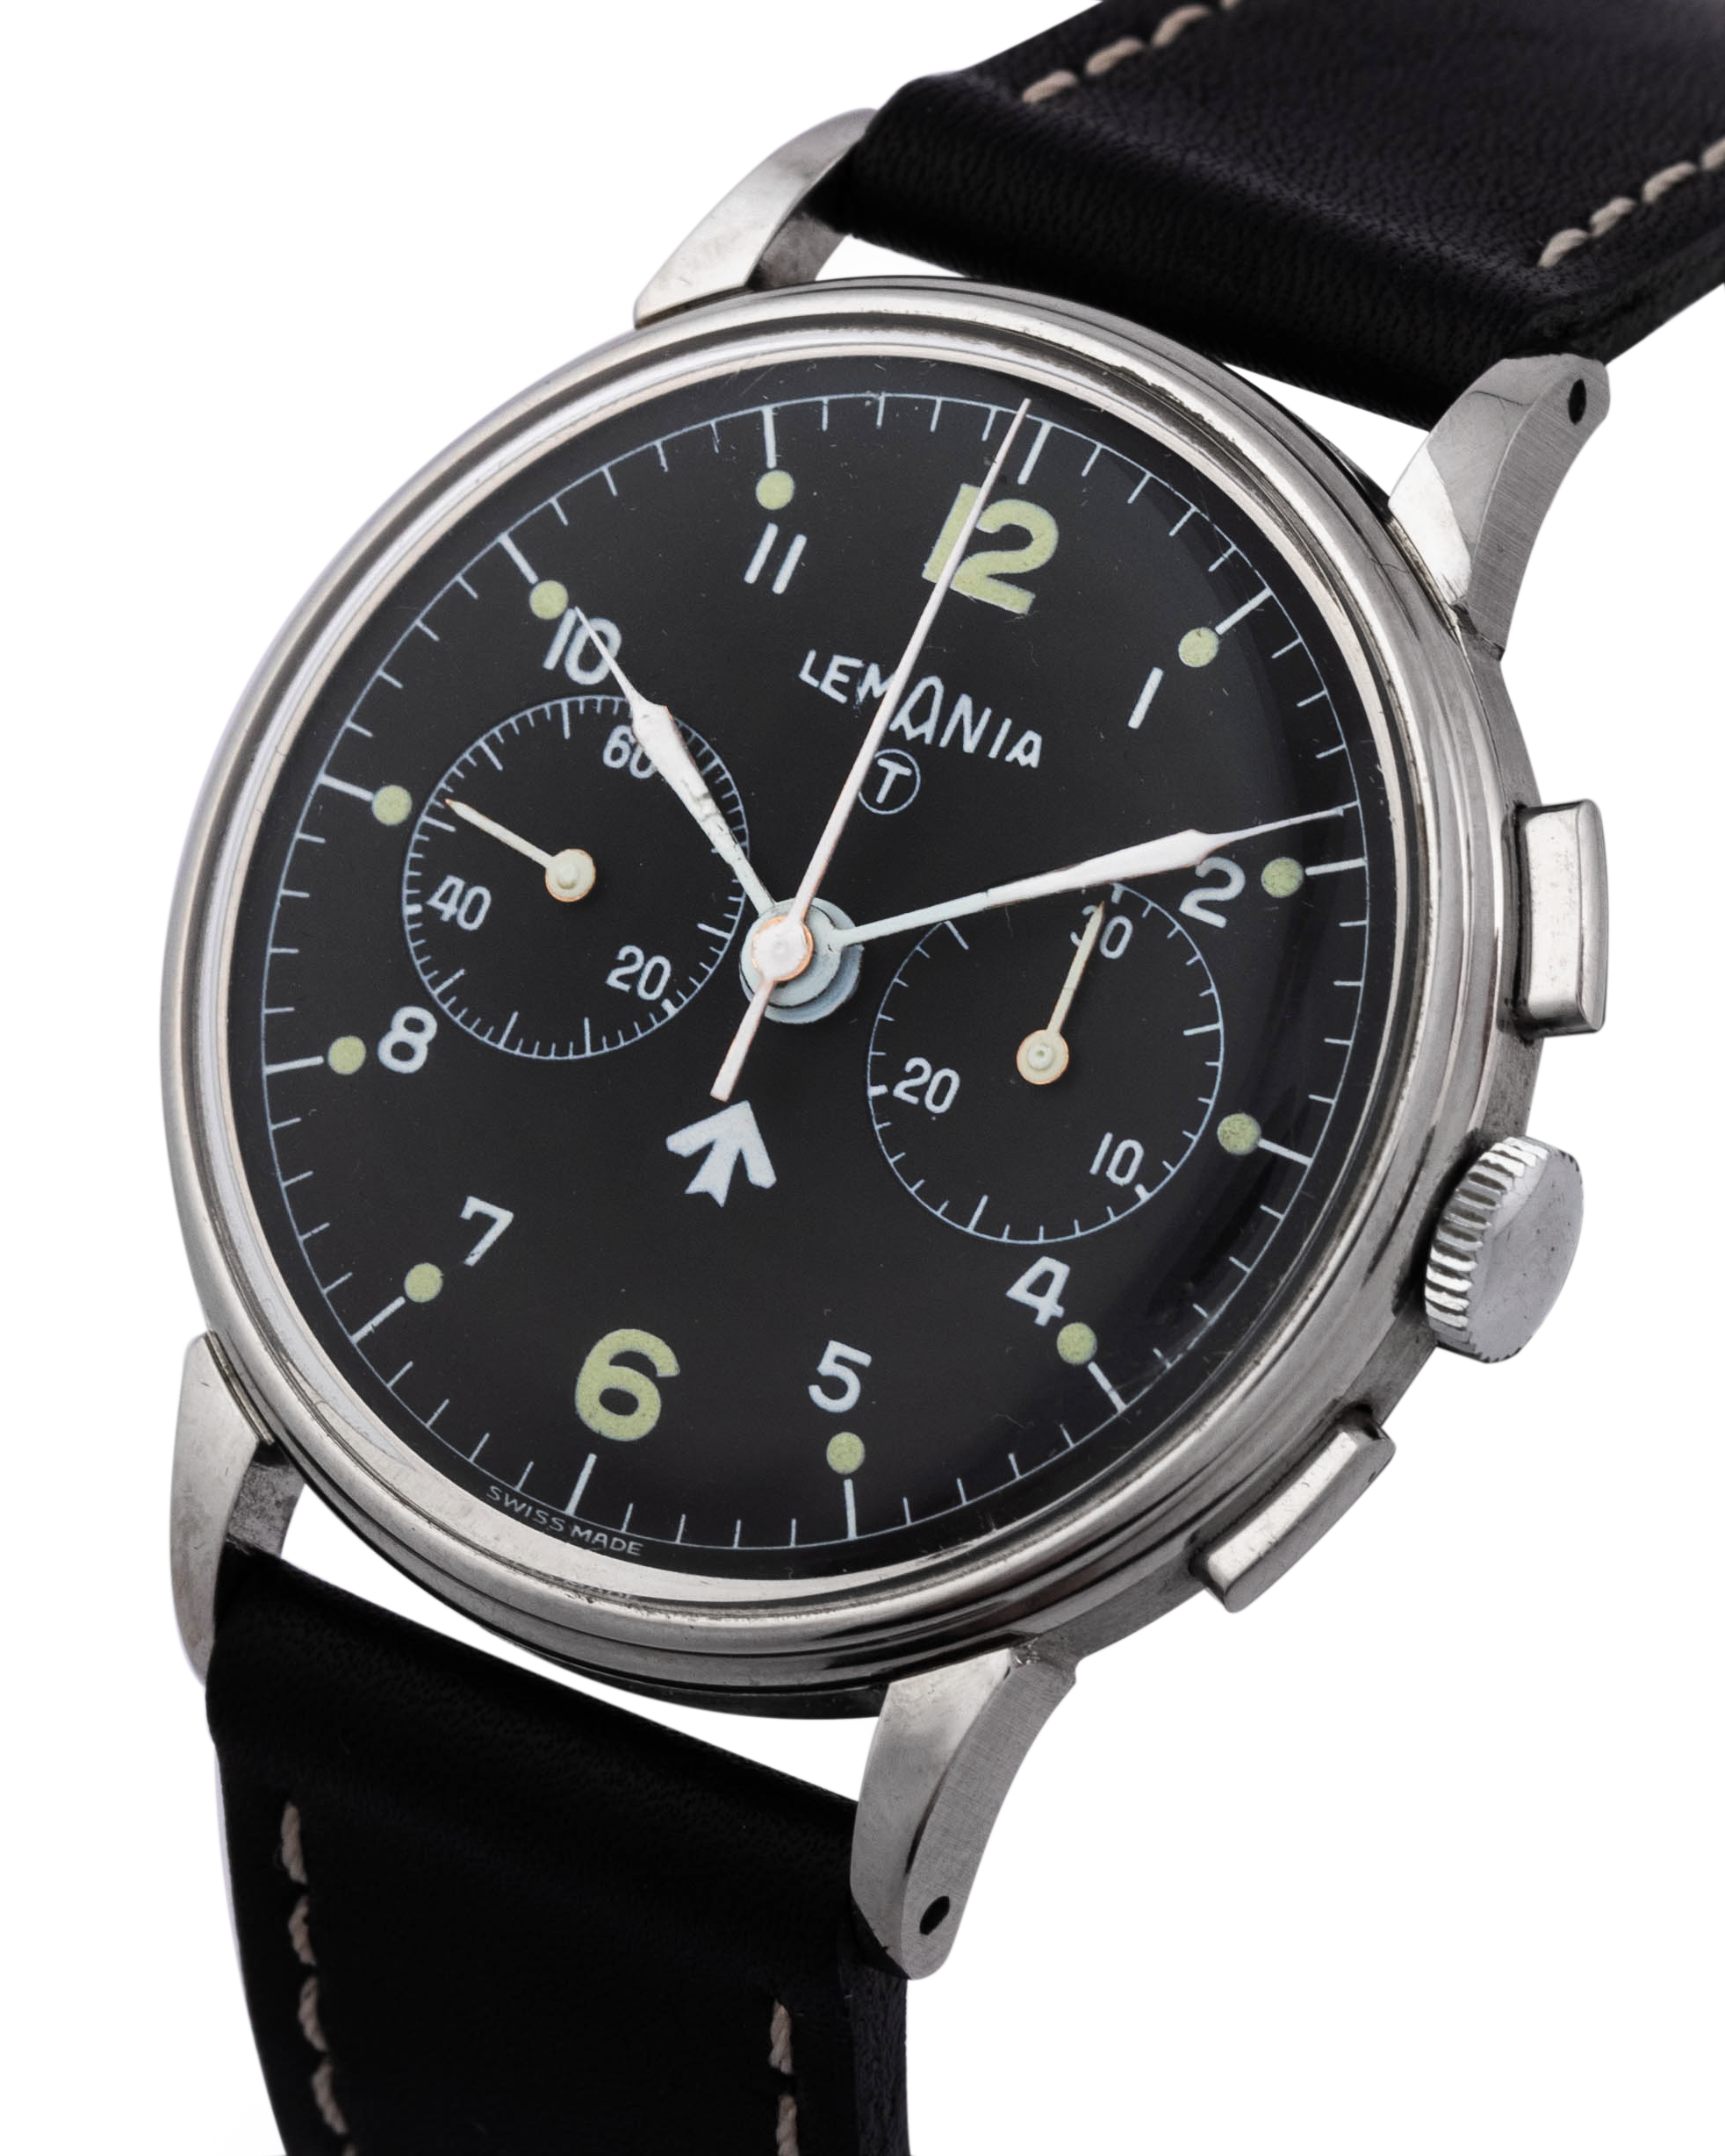 Lemania Chronograph wrist watch in stainless steel, black dial produced for Royal Navy USA